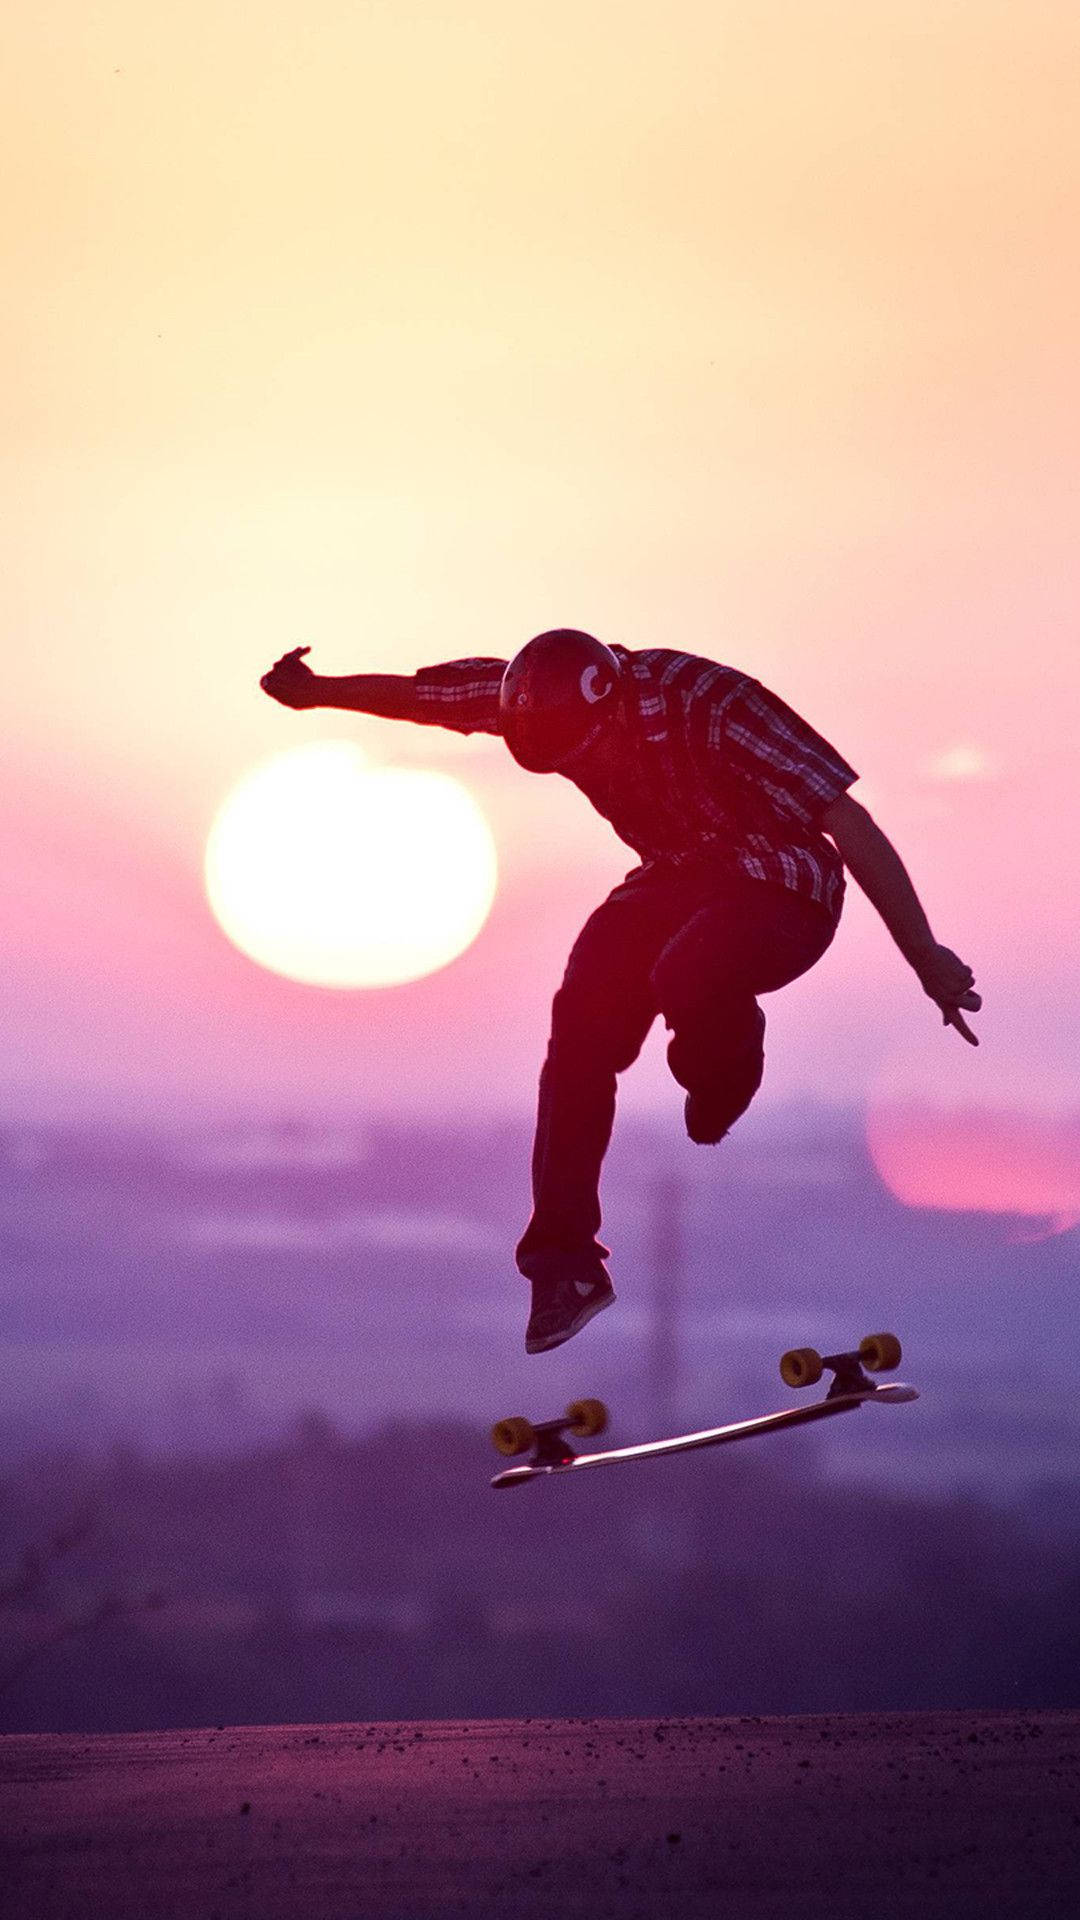 Skater Mid-air With Skateboard Iphone Wallpaper